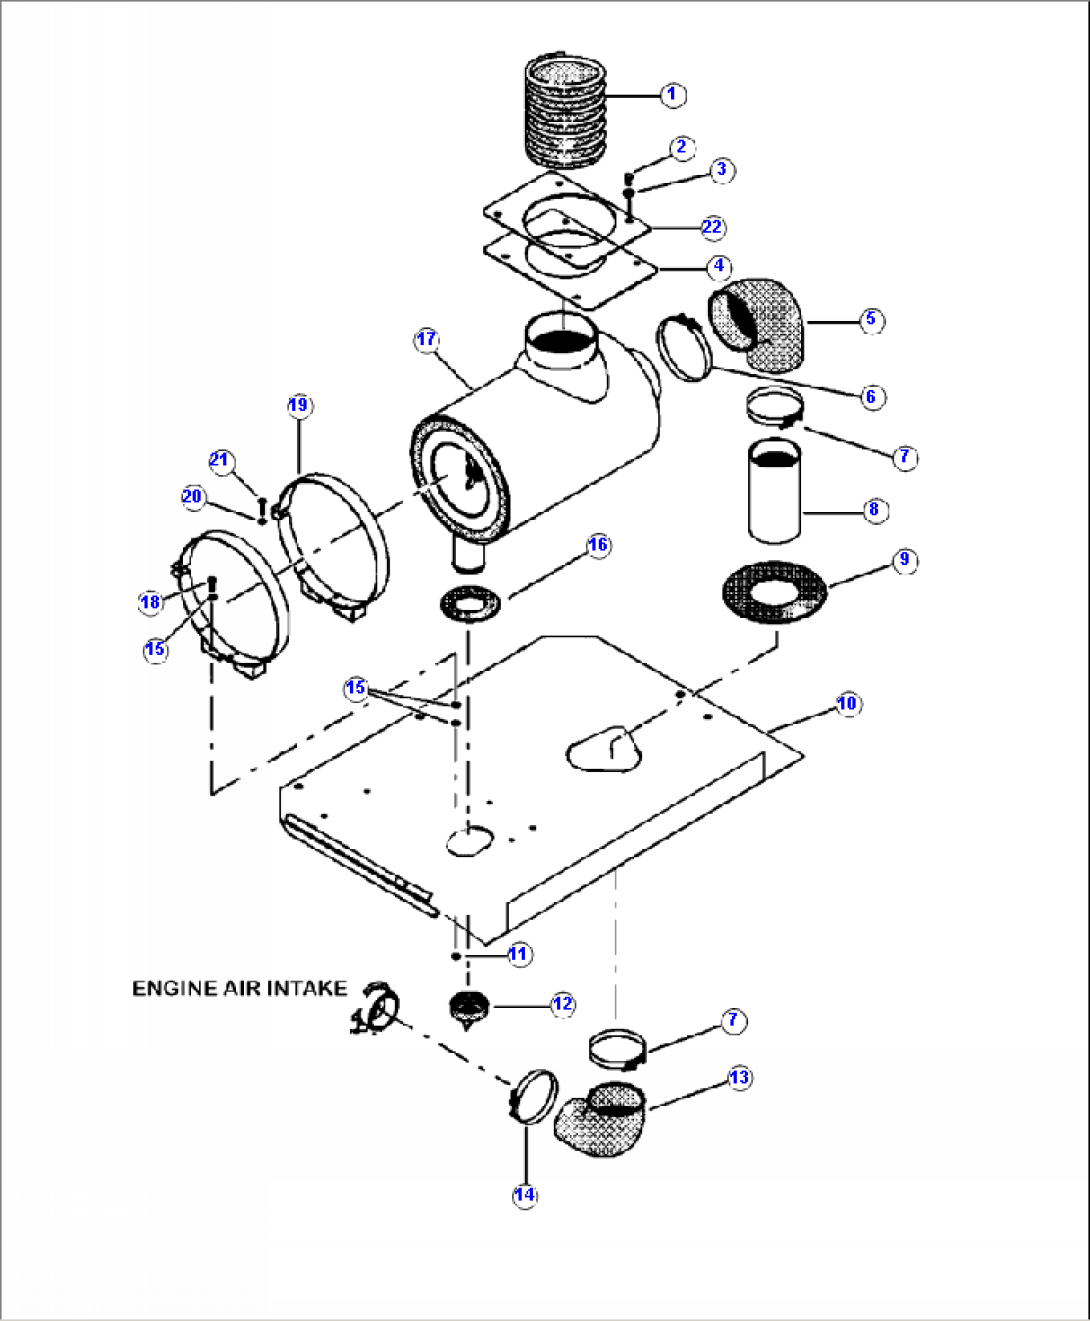 B1490-01A0 AIR CLEANER MOUNTING